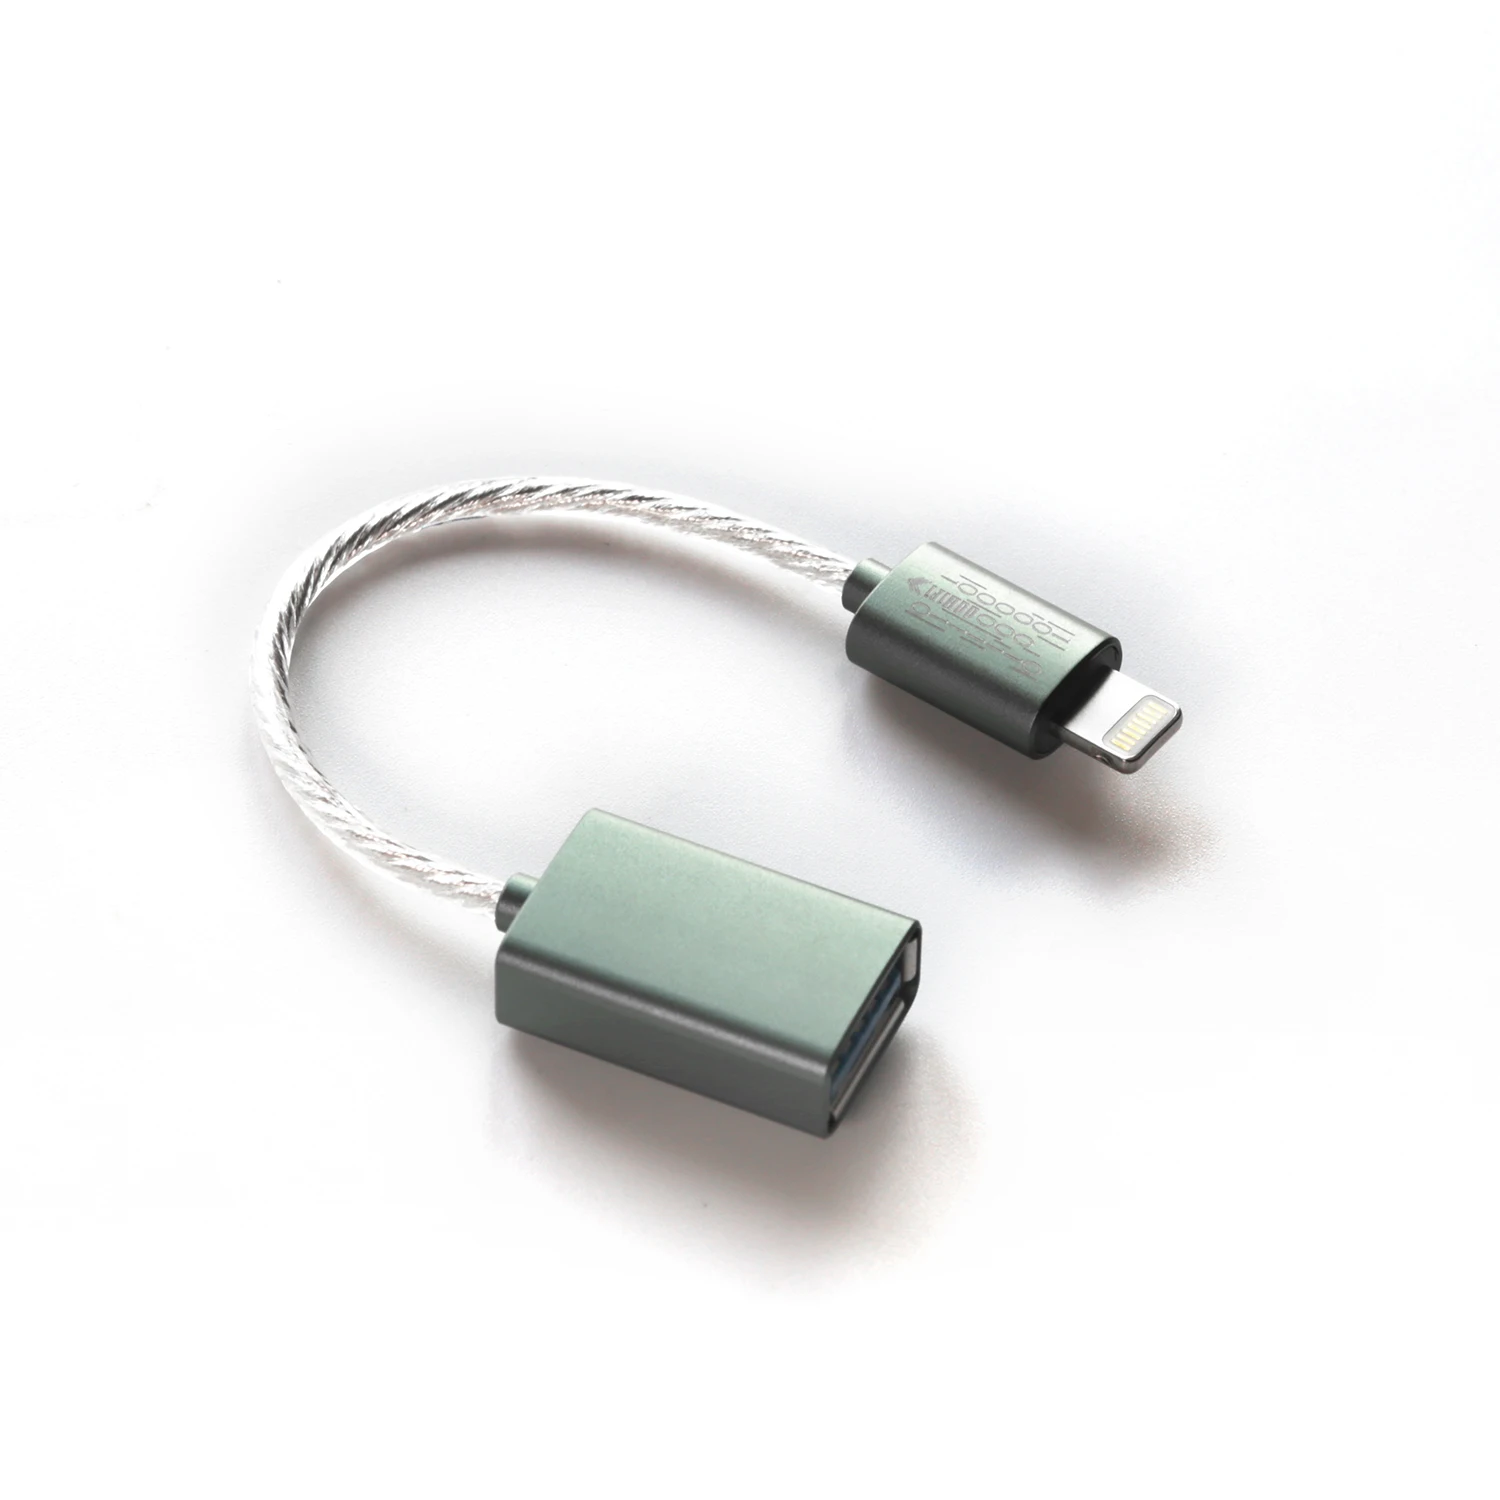 

DD ddHiFi MFi06F Light-ning to USB-A Female USB OTG Cable to Connect iOS Devices with USB-A DAC / AMP